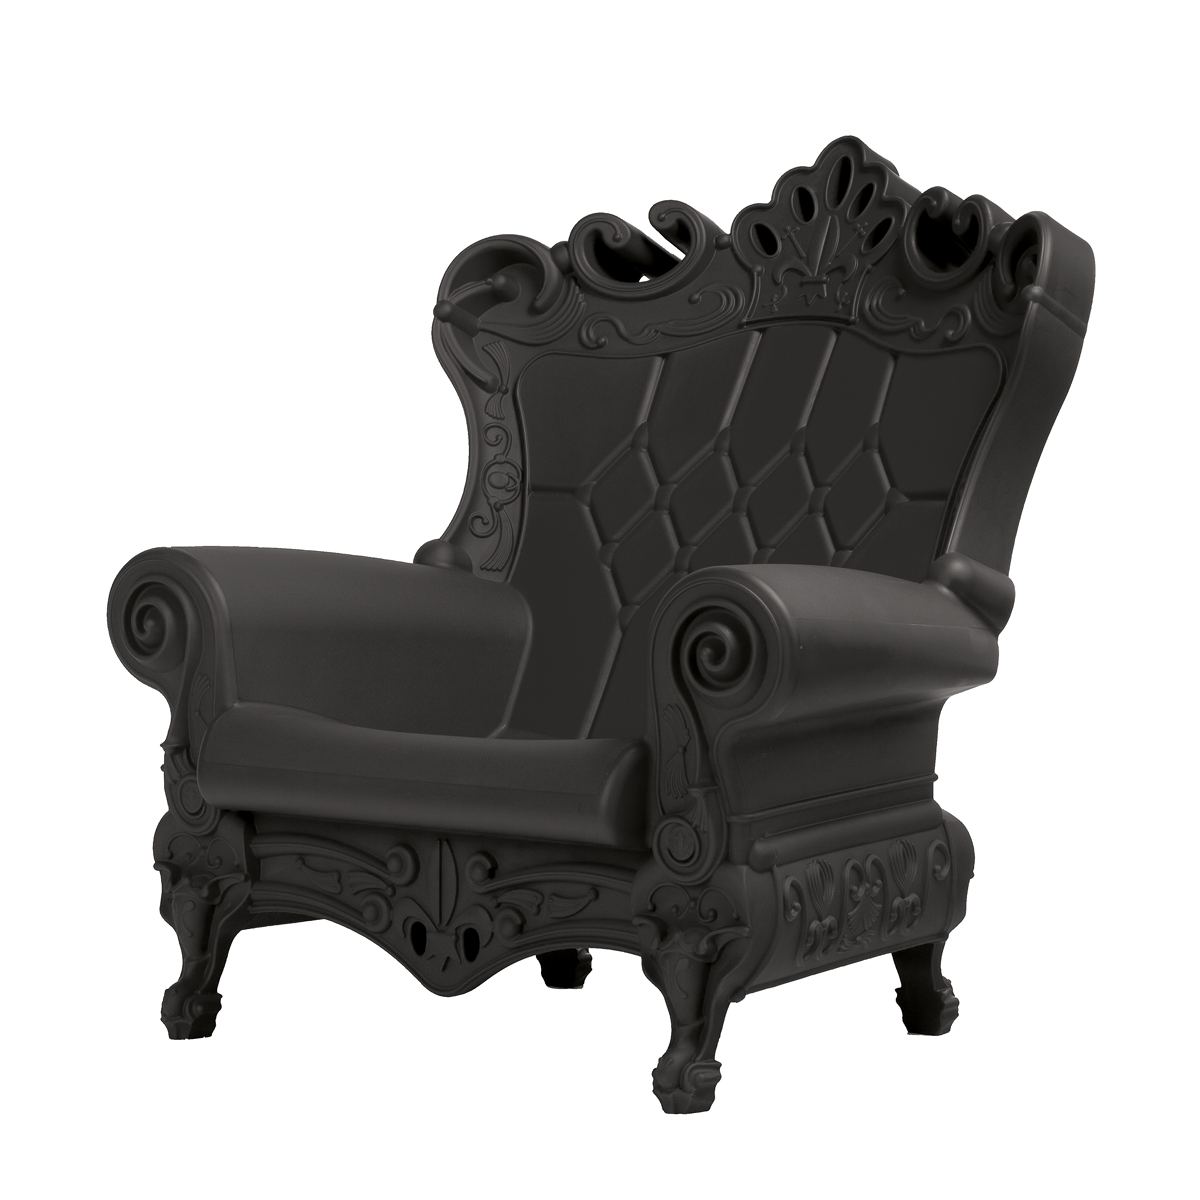 Queen of Love lounge chair from Slide